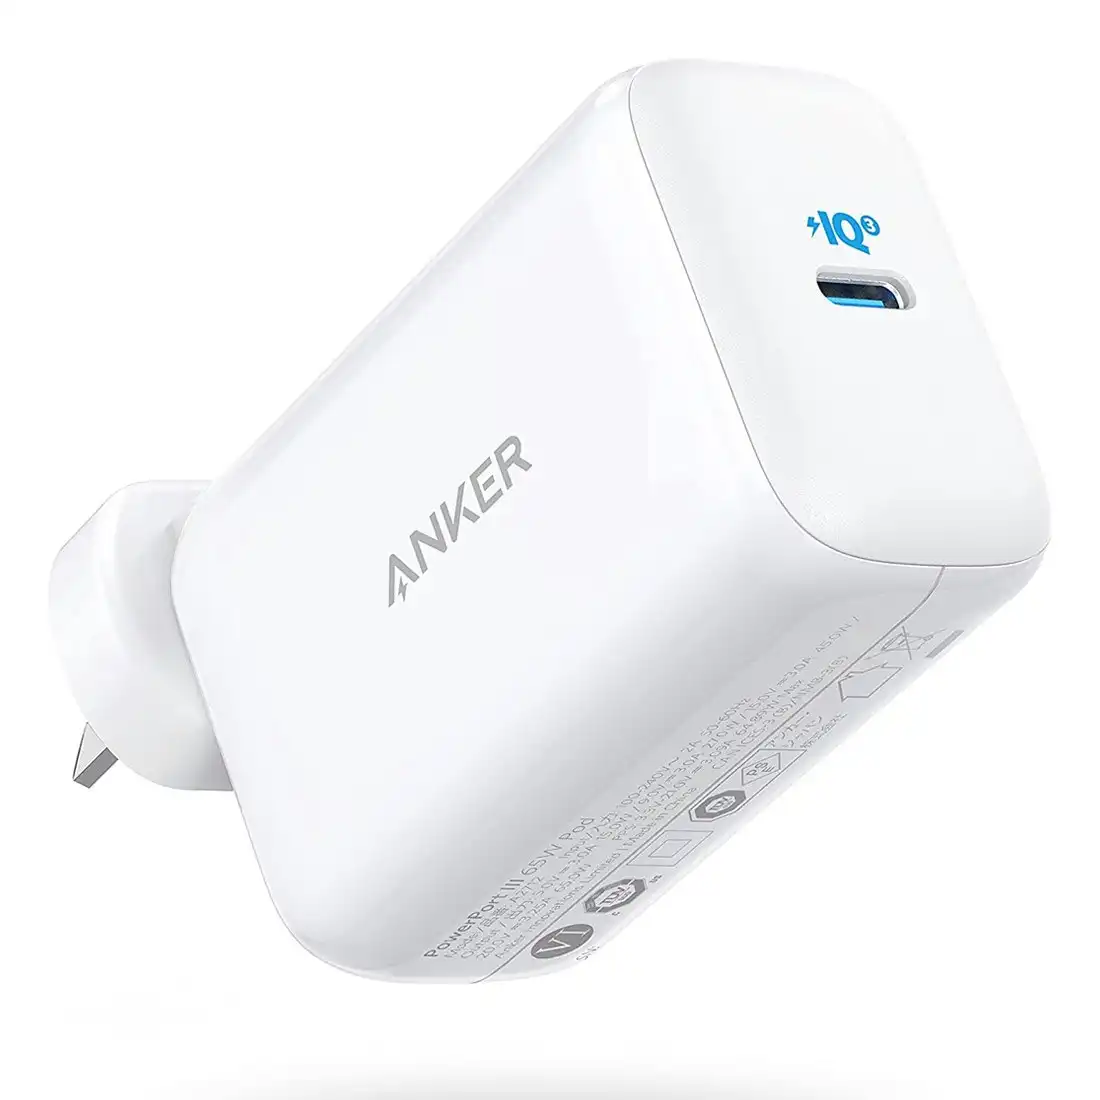 Anker PowerPort III 65W Pod USB C Charger - White